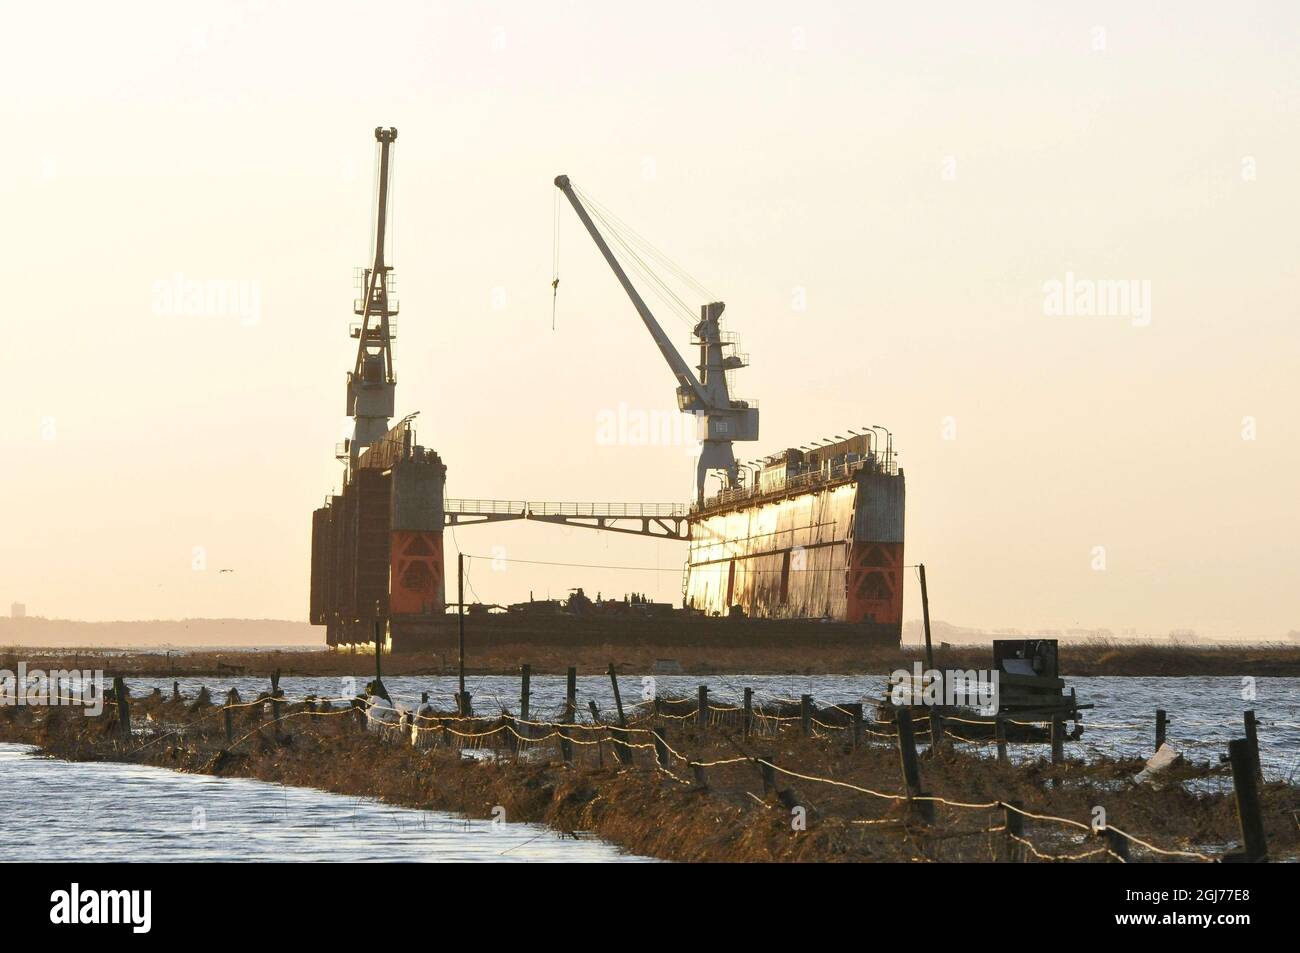 At 165 meters long an 6 000 kilotons floating dock is seen aground near the city of Landskrona, Sweden, November 28, 2011. The floating dock broke loose by the storm winds at the South Swedish coast line. Foto: Johan Nilsson / SCANPIX / Kod 50090 Stock Photo